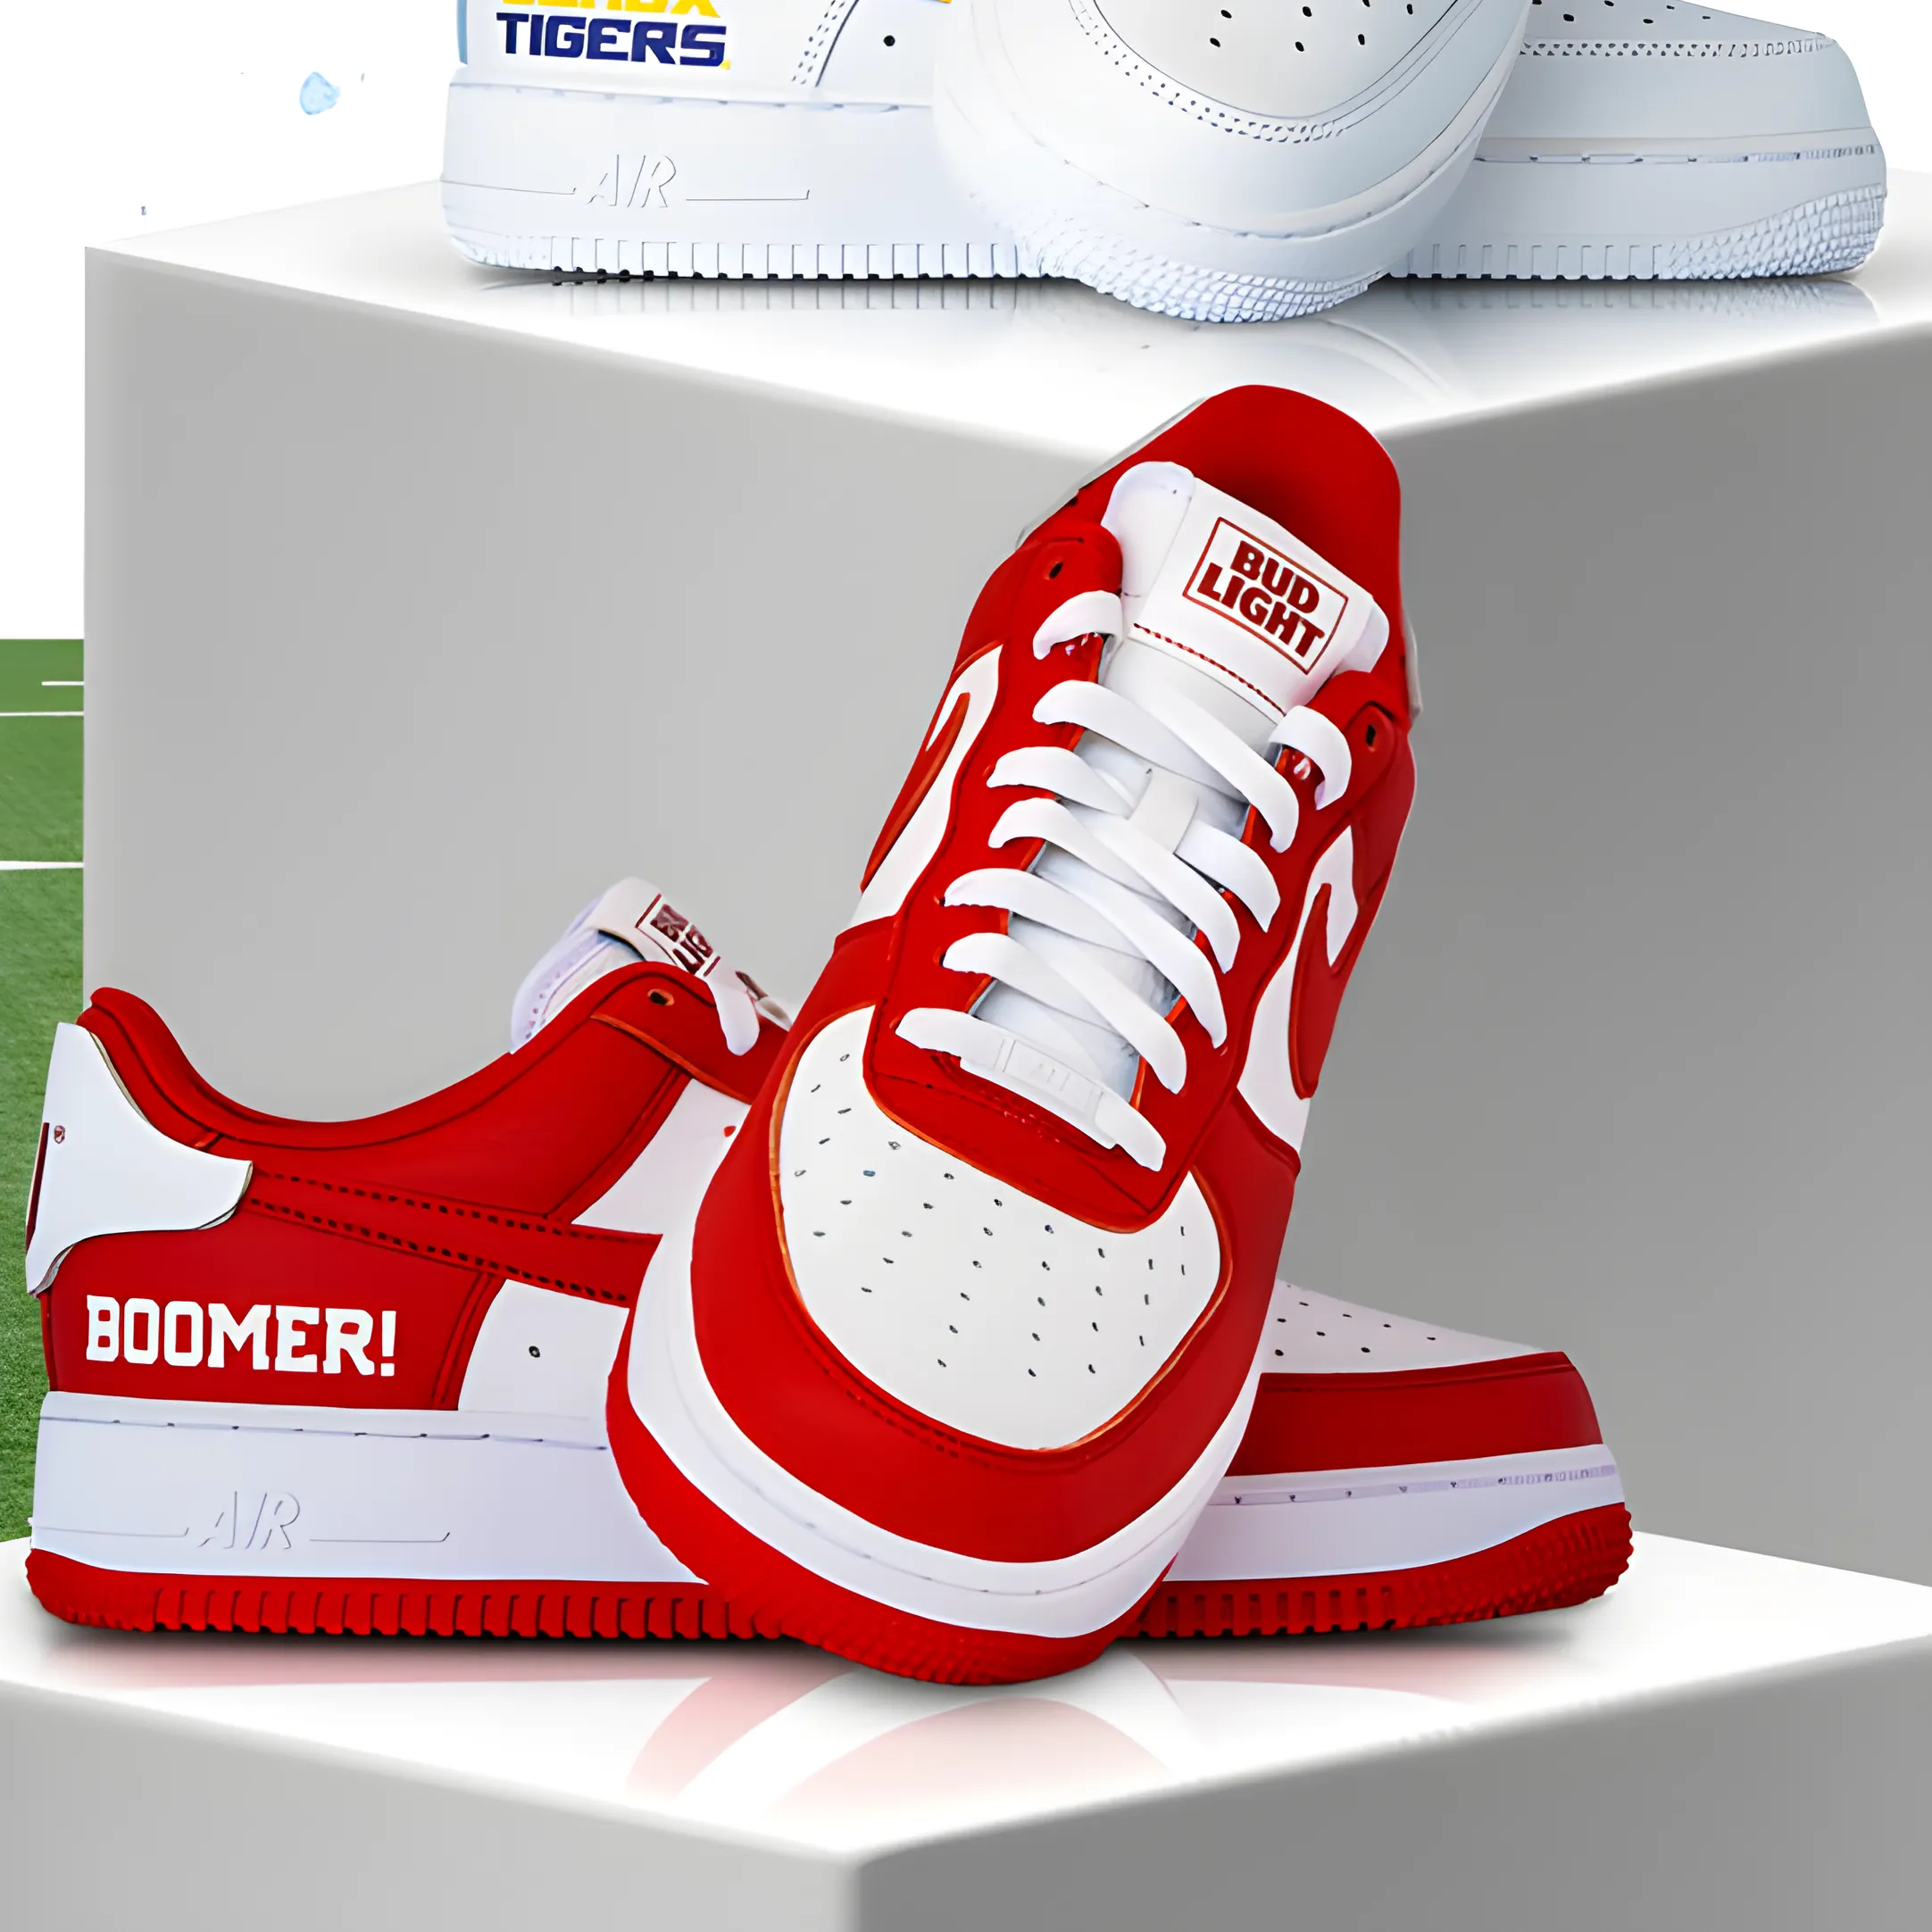 Free Bud Light College Football Sneakers